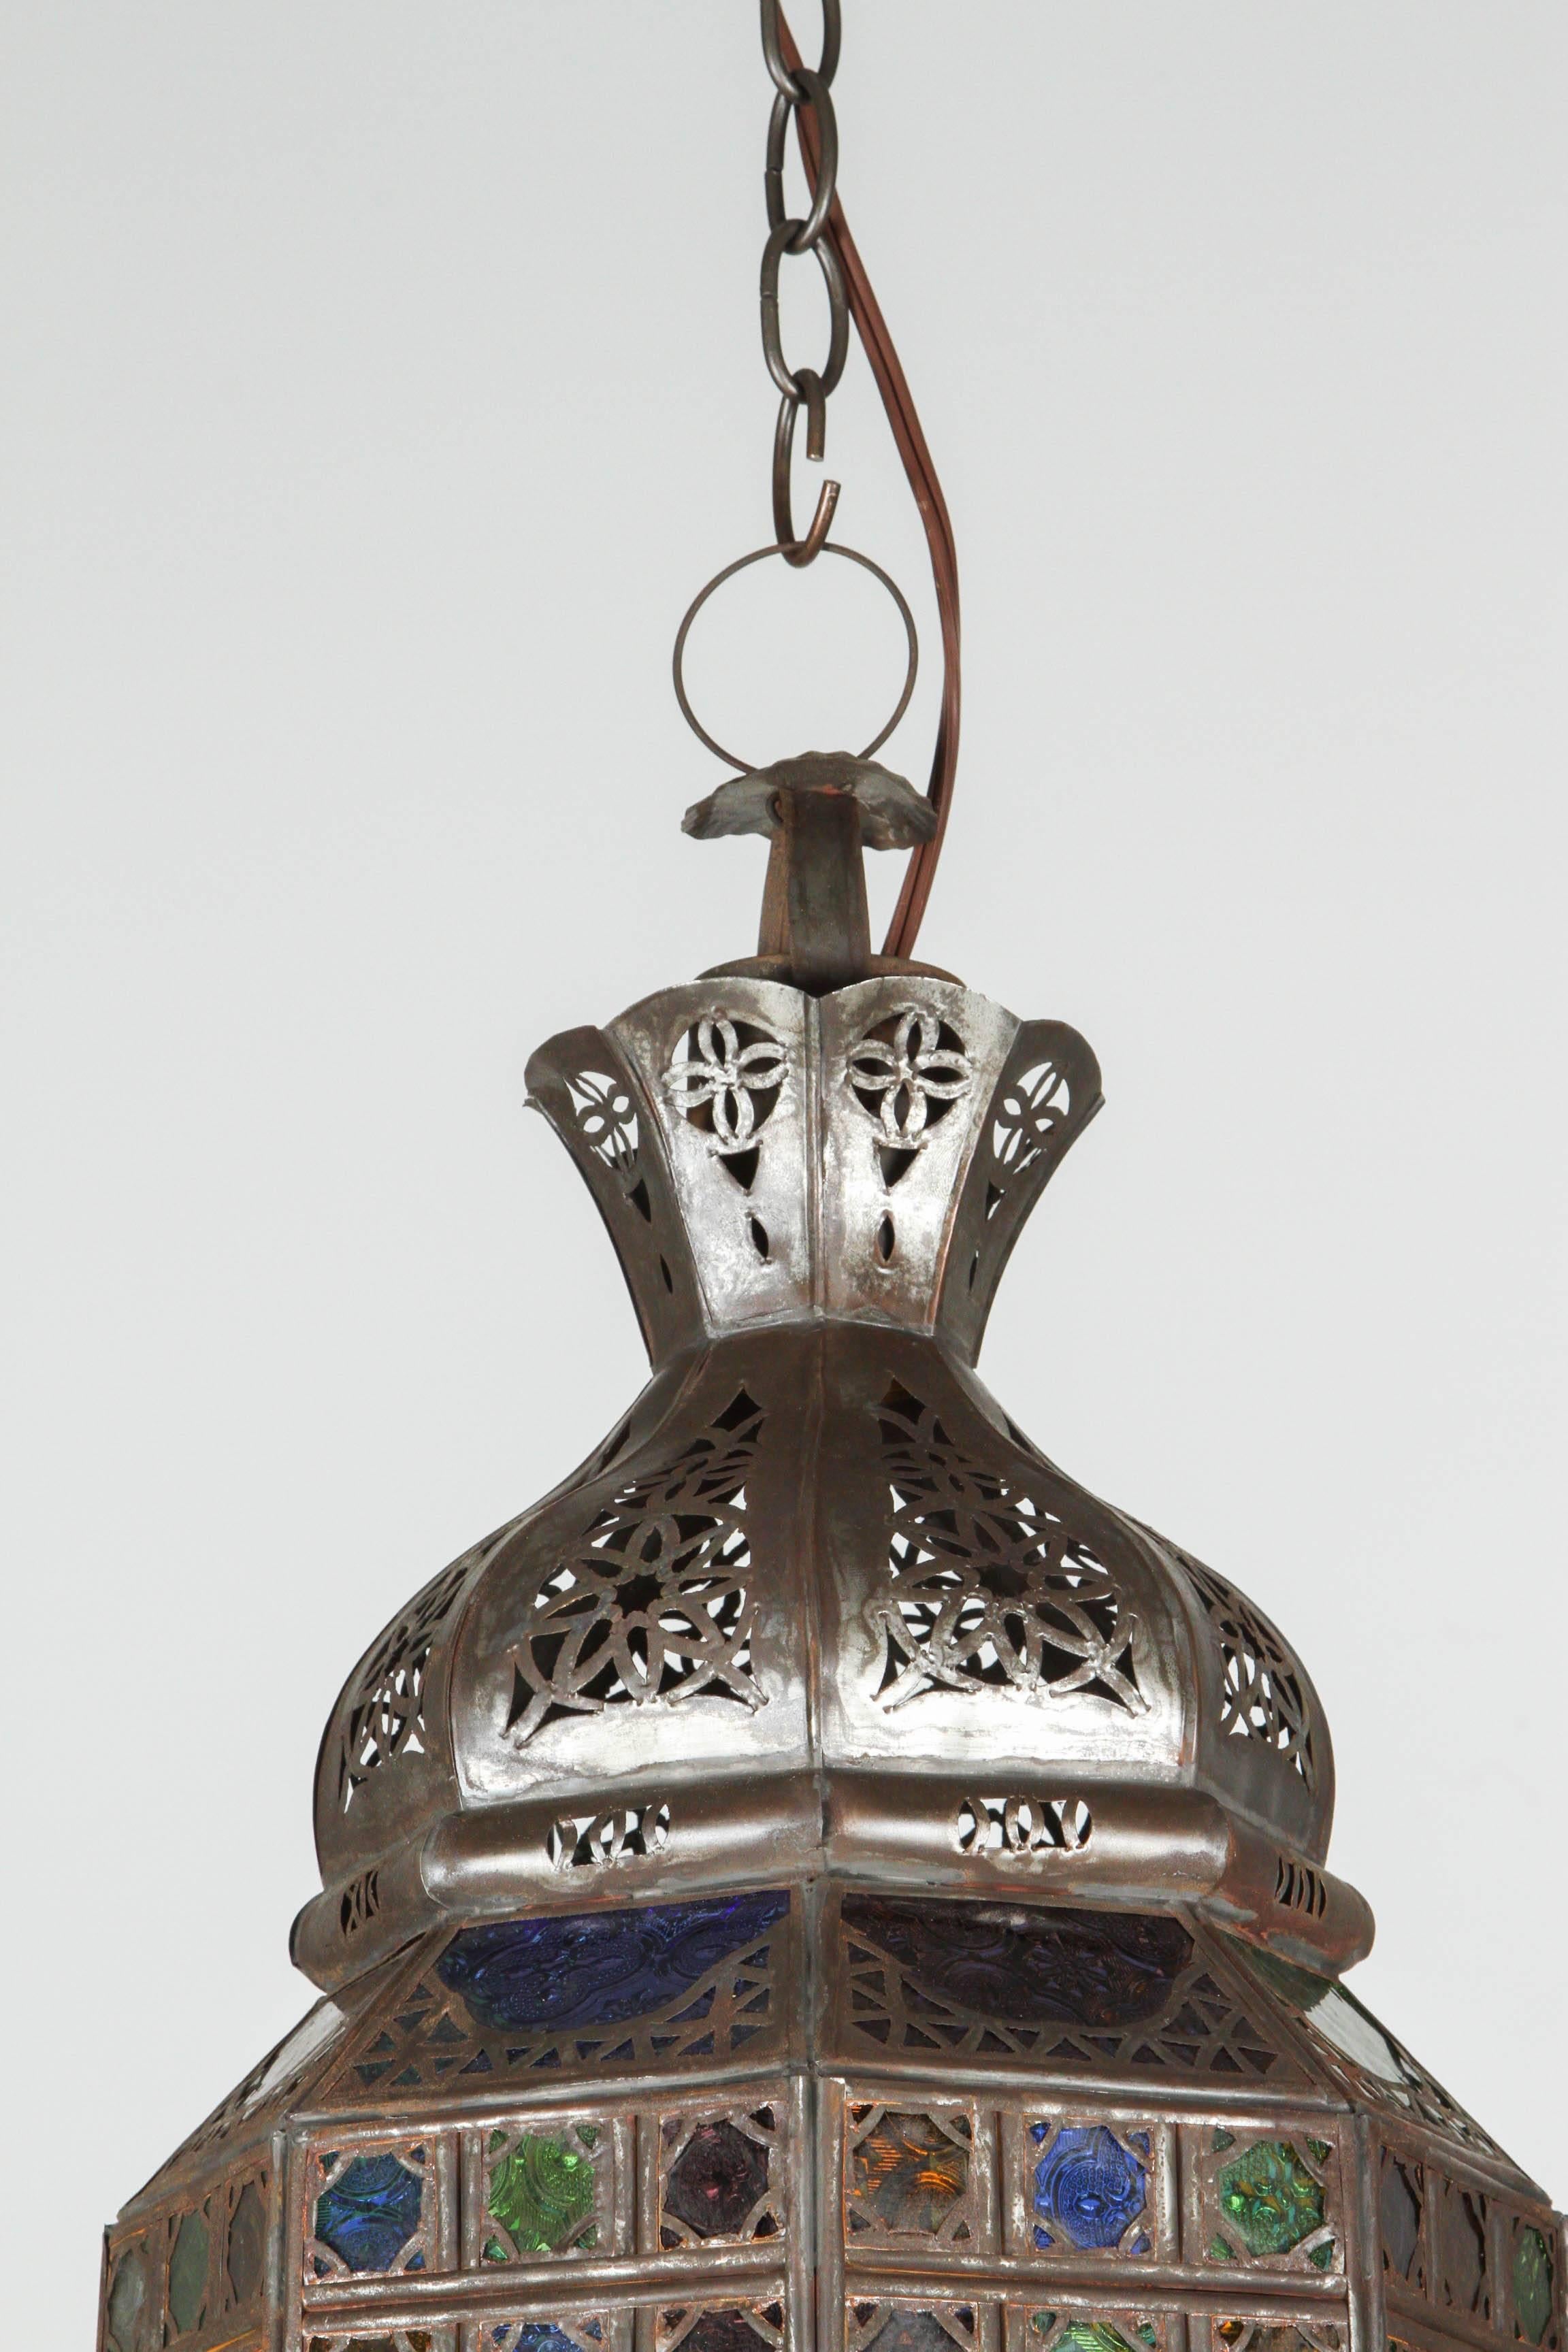 Hammered Moroccan Metal Moorish Lantern with Stained Glass